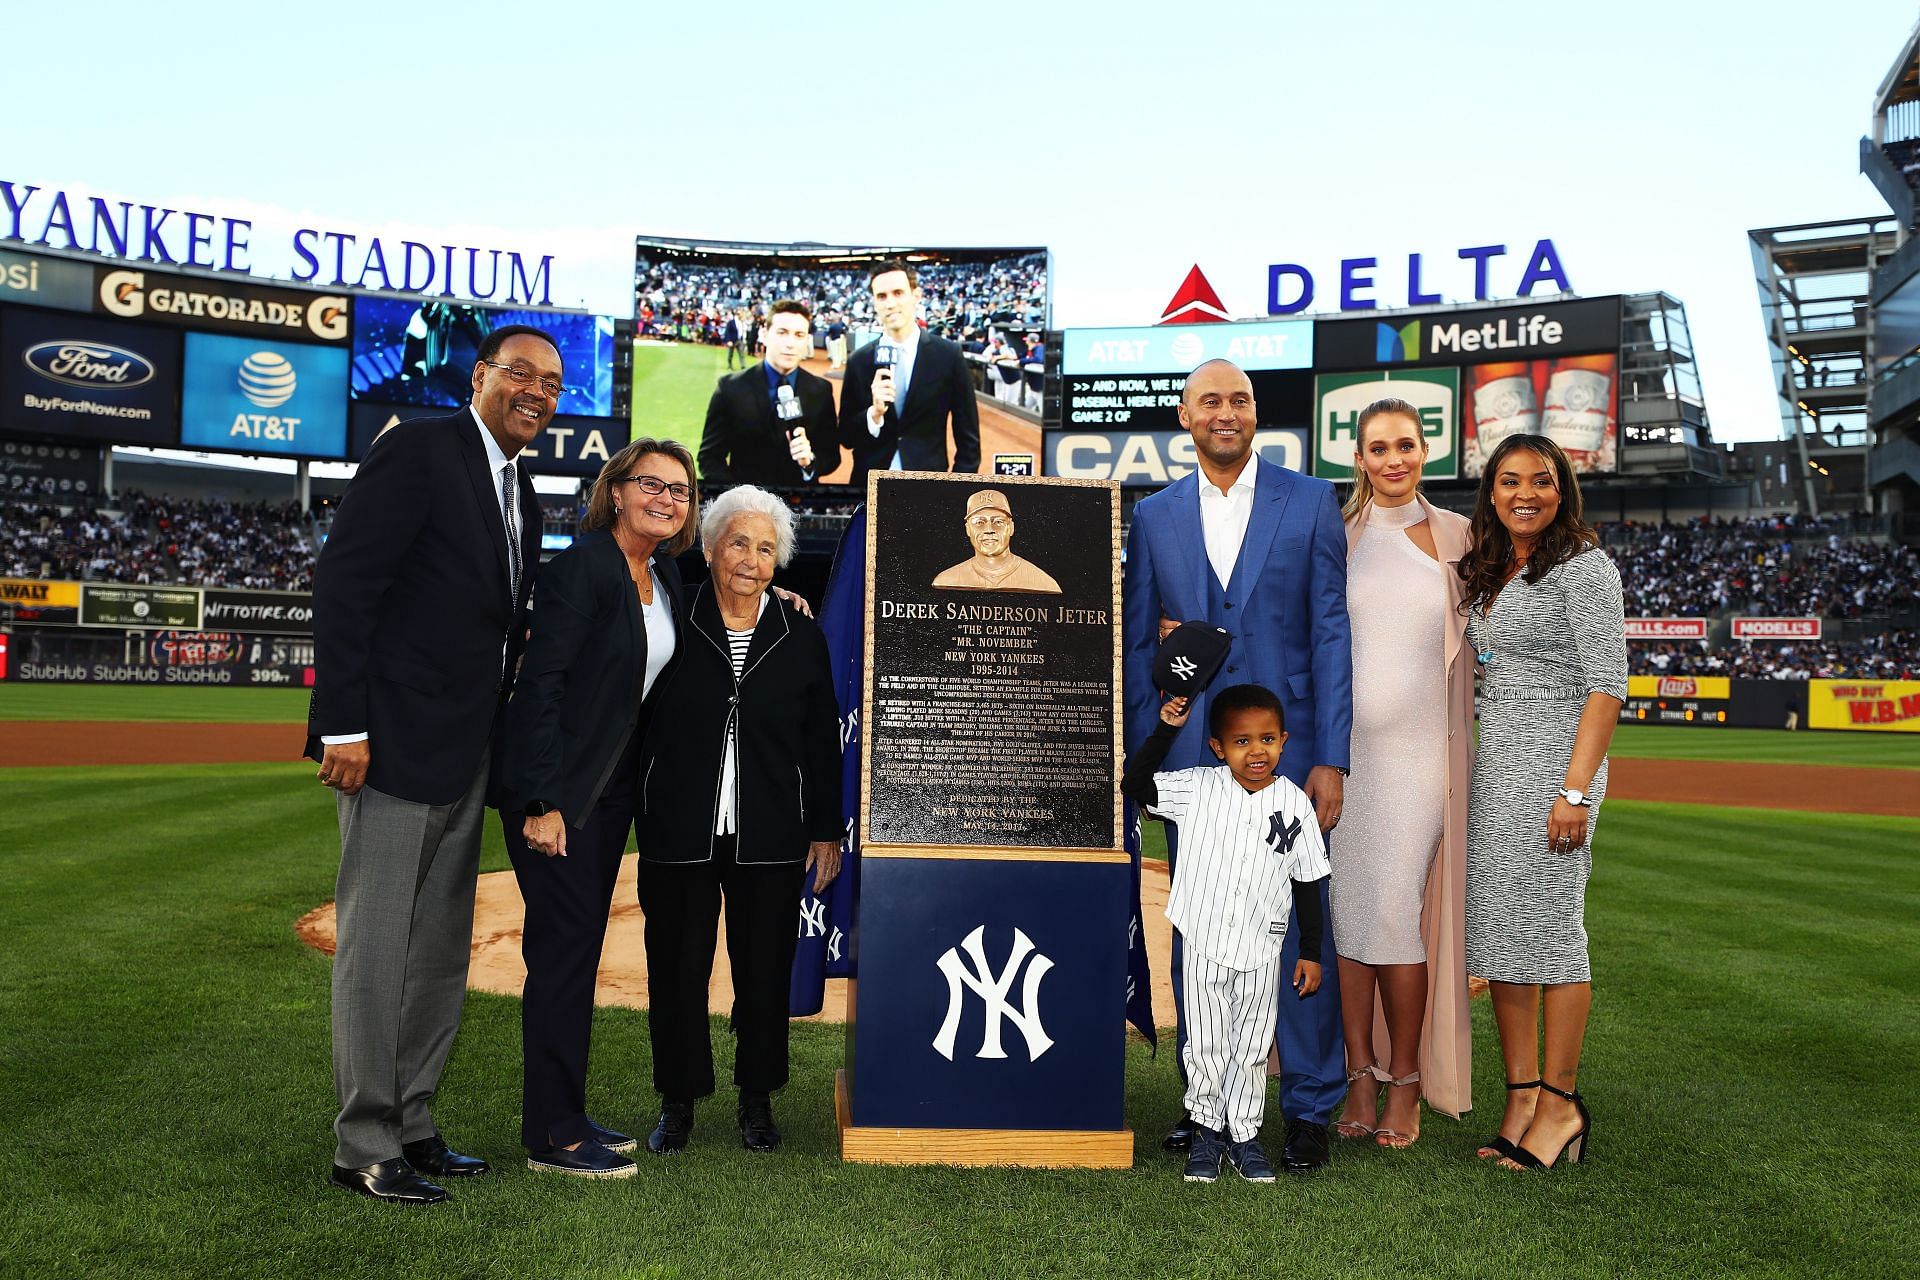 NEW YORK, NY - MAY 14: Derek poses with his family during the retirement ceremony of his number 2 jersey at Yankee Stadium on May 14, 2017, in New York City. (Photo by Al Bello/General Mills via Getty Images)